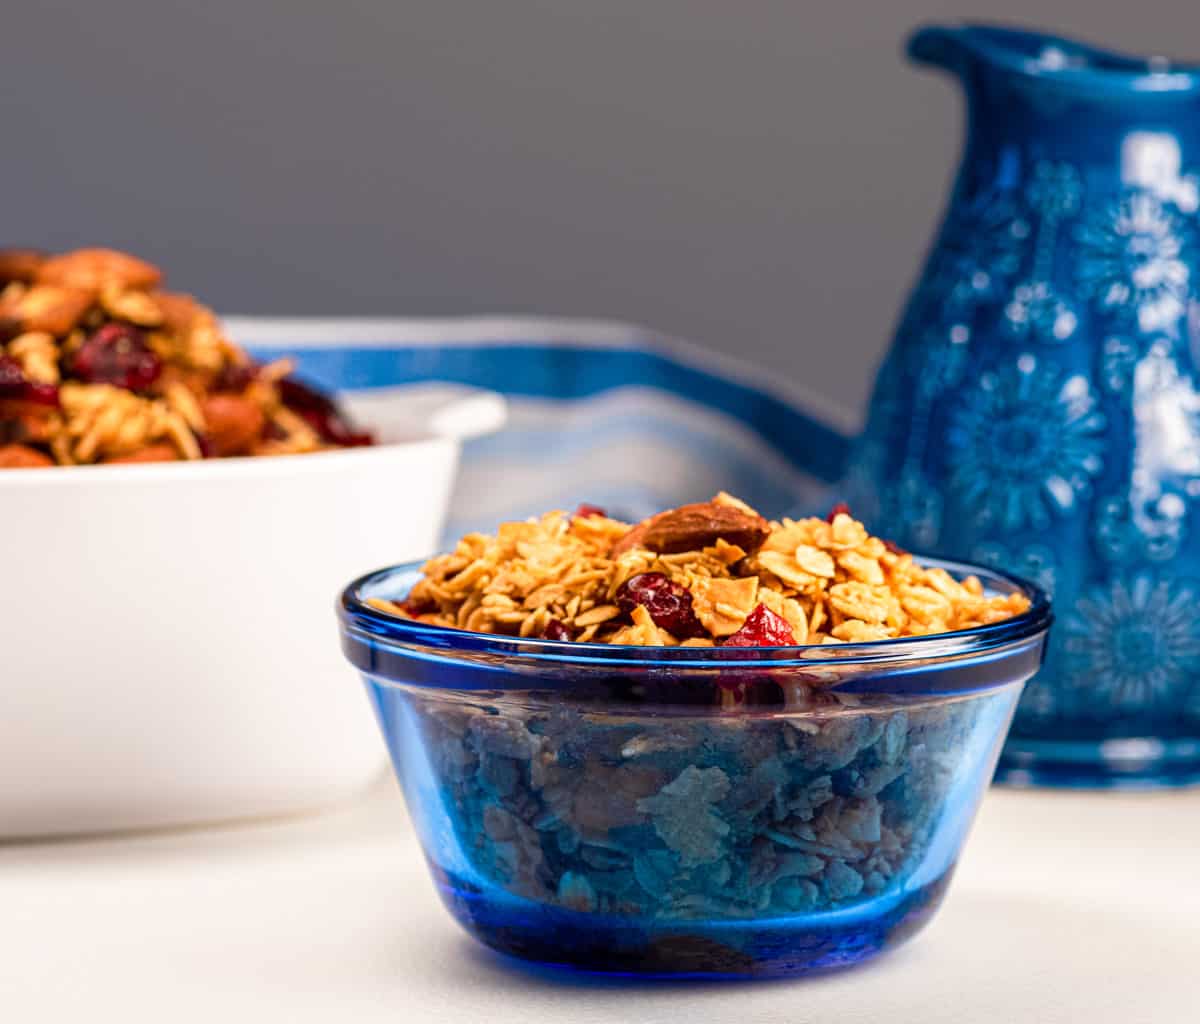 Bowl of vanilla cranberry coconut granola with almonds and cranberries in a blue bowl with a blue pitcher in the background.